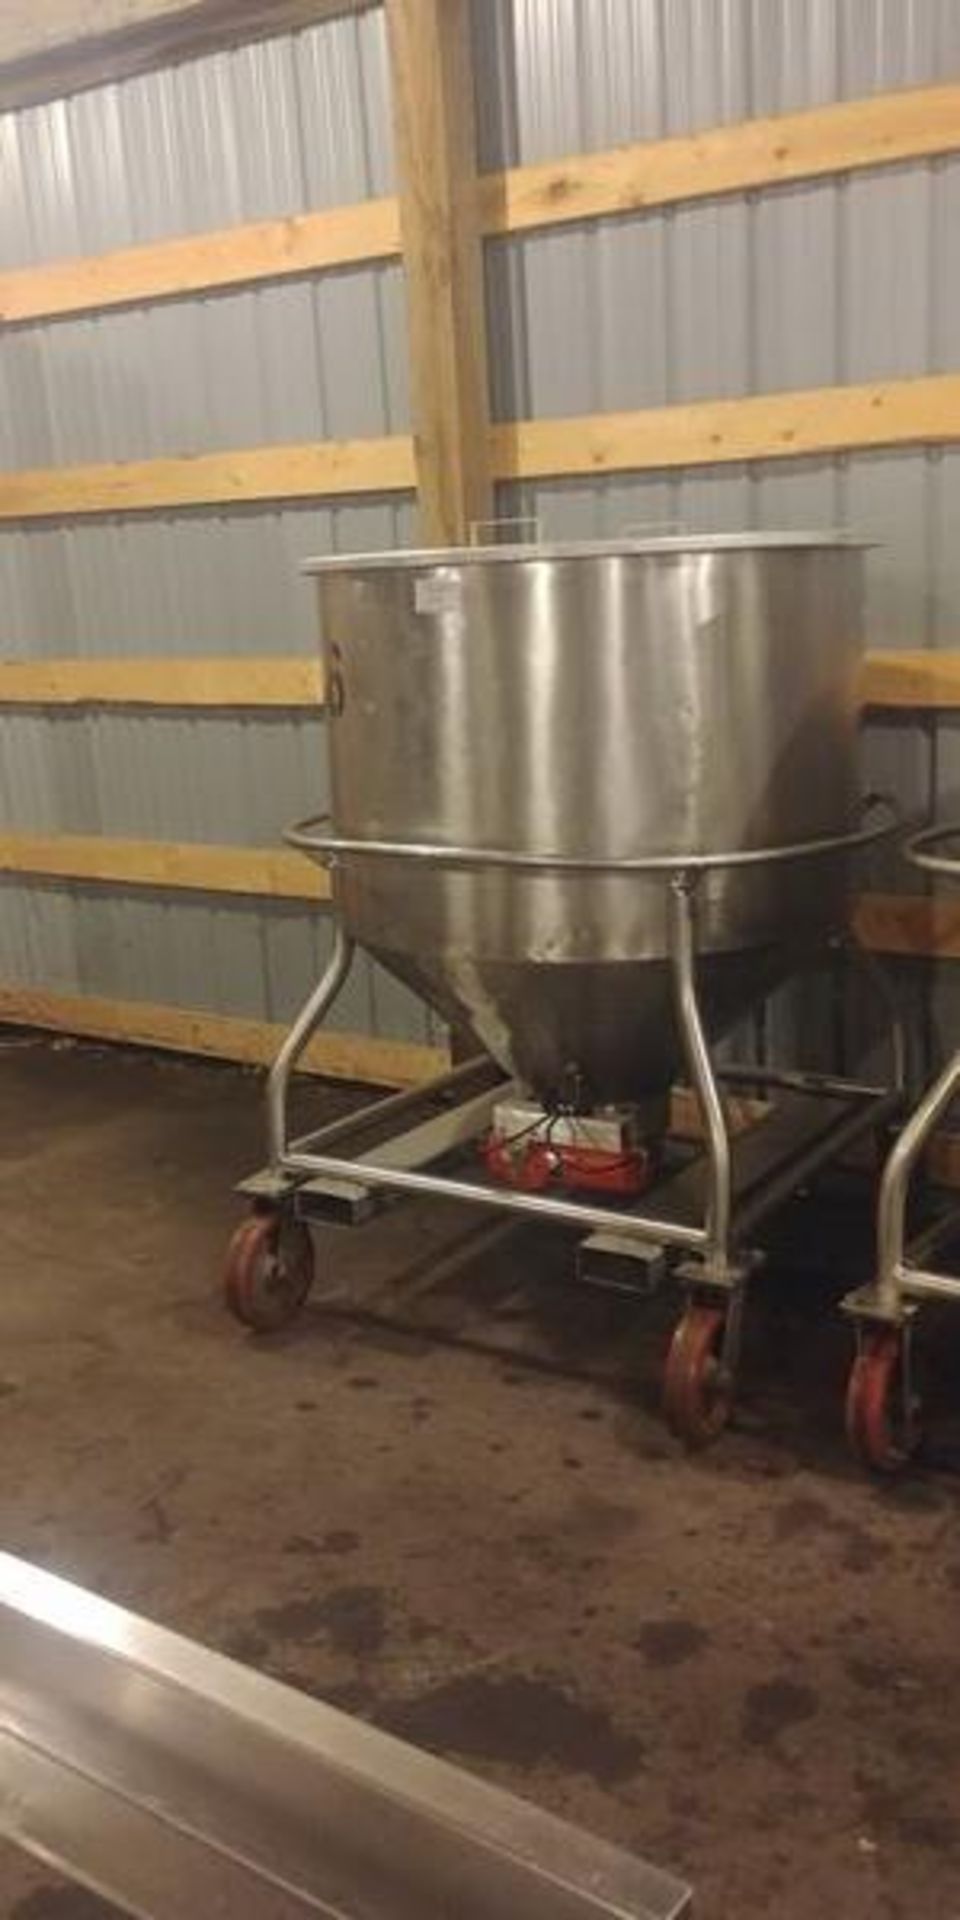 Stainless Steel Transfer Tank on Casters - Approx 45" Diameter and Approx 47" to Bottom of Cone - Image 2 of 2